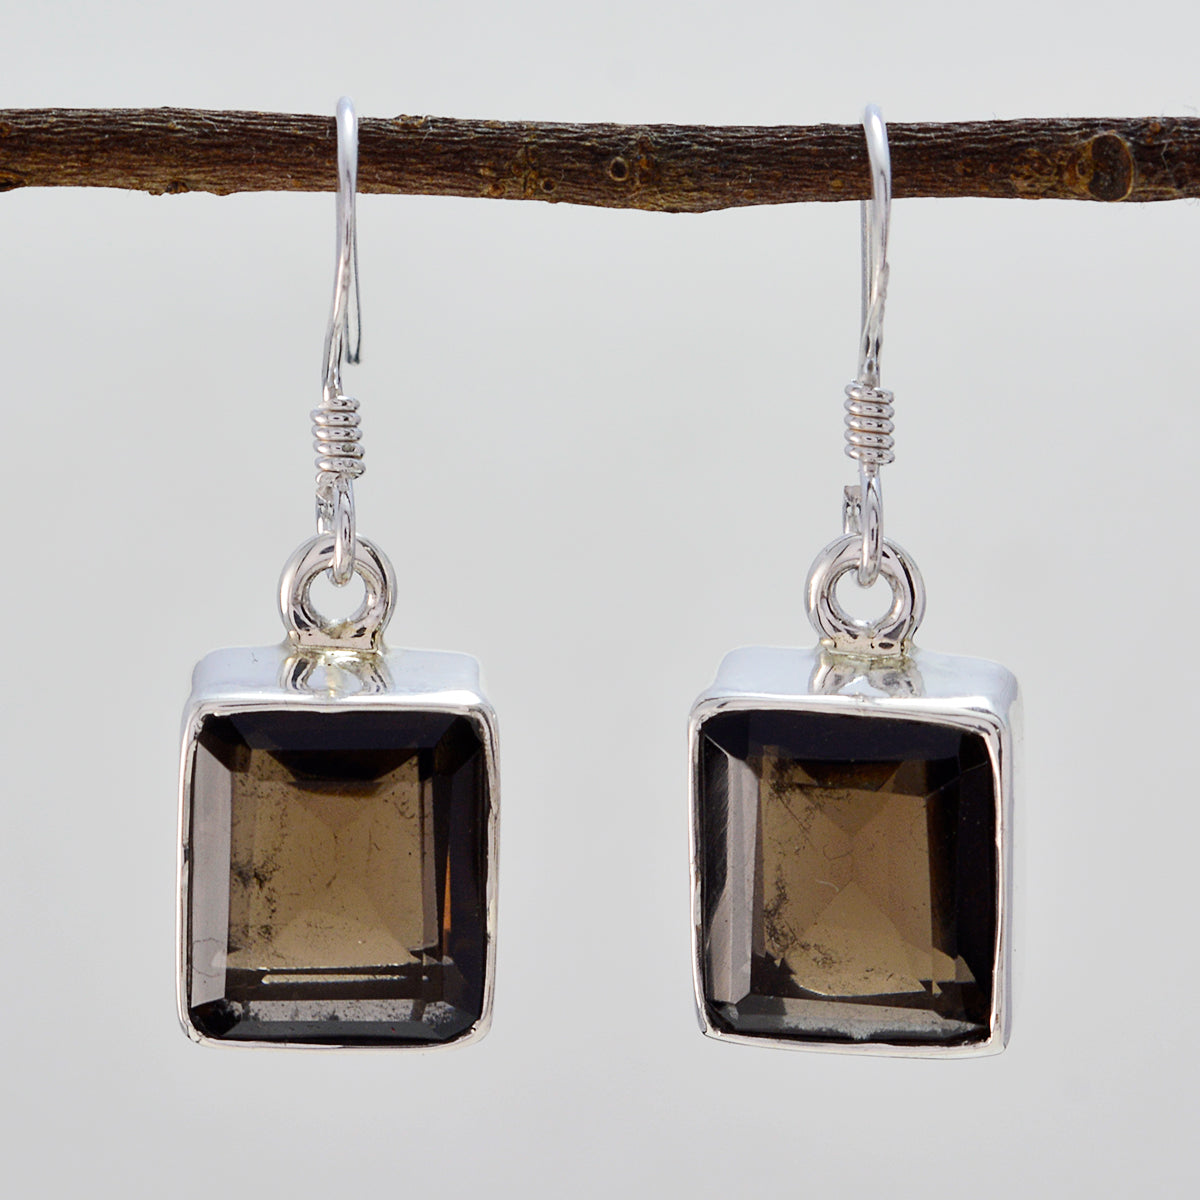 Riyo Genuine Gems Octogon Faceted Brown Smokey Quartz Silver Earring gift for mothers day